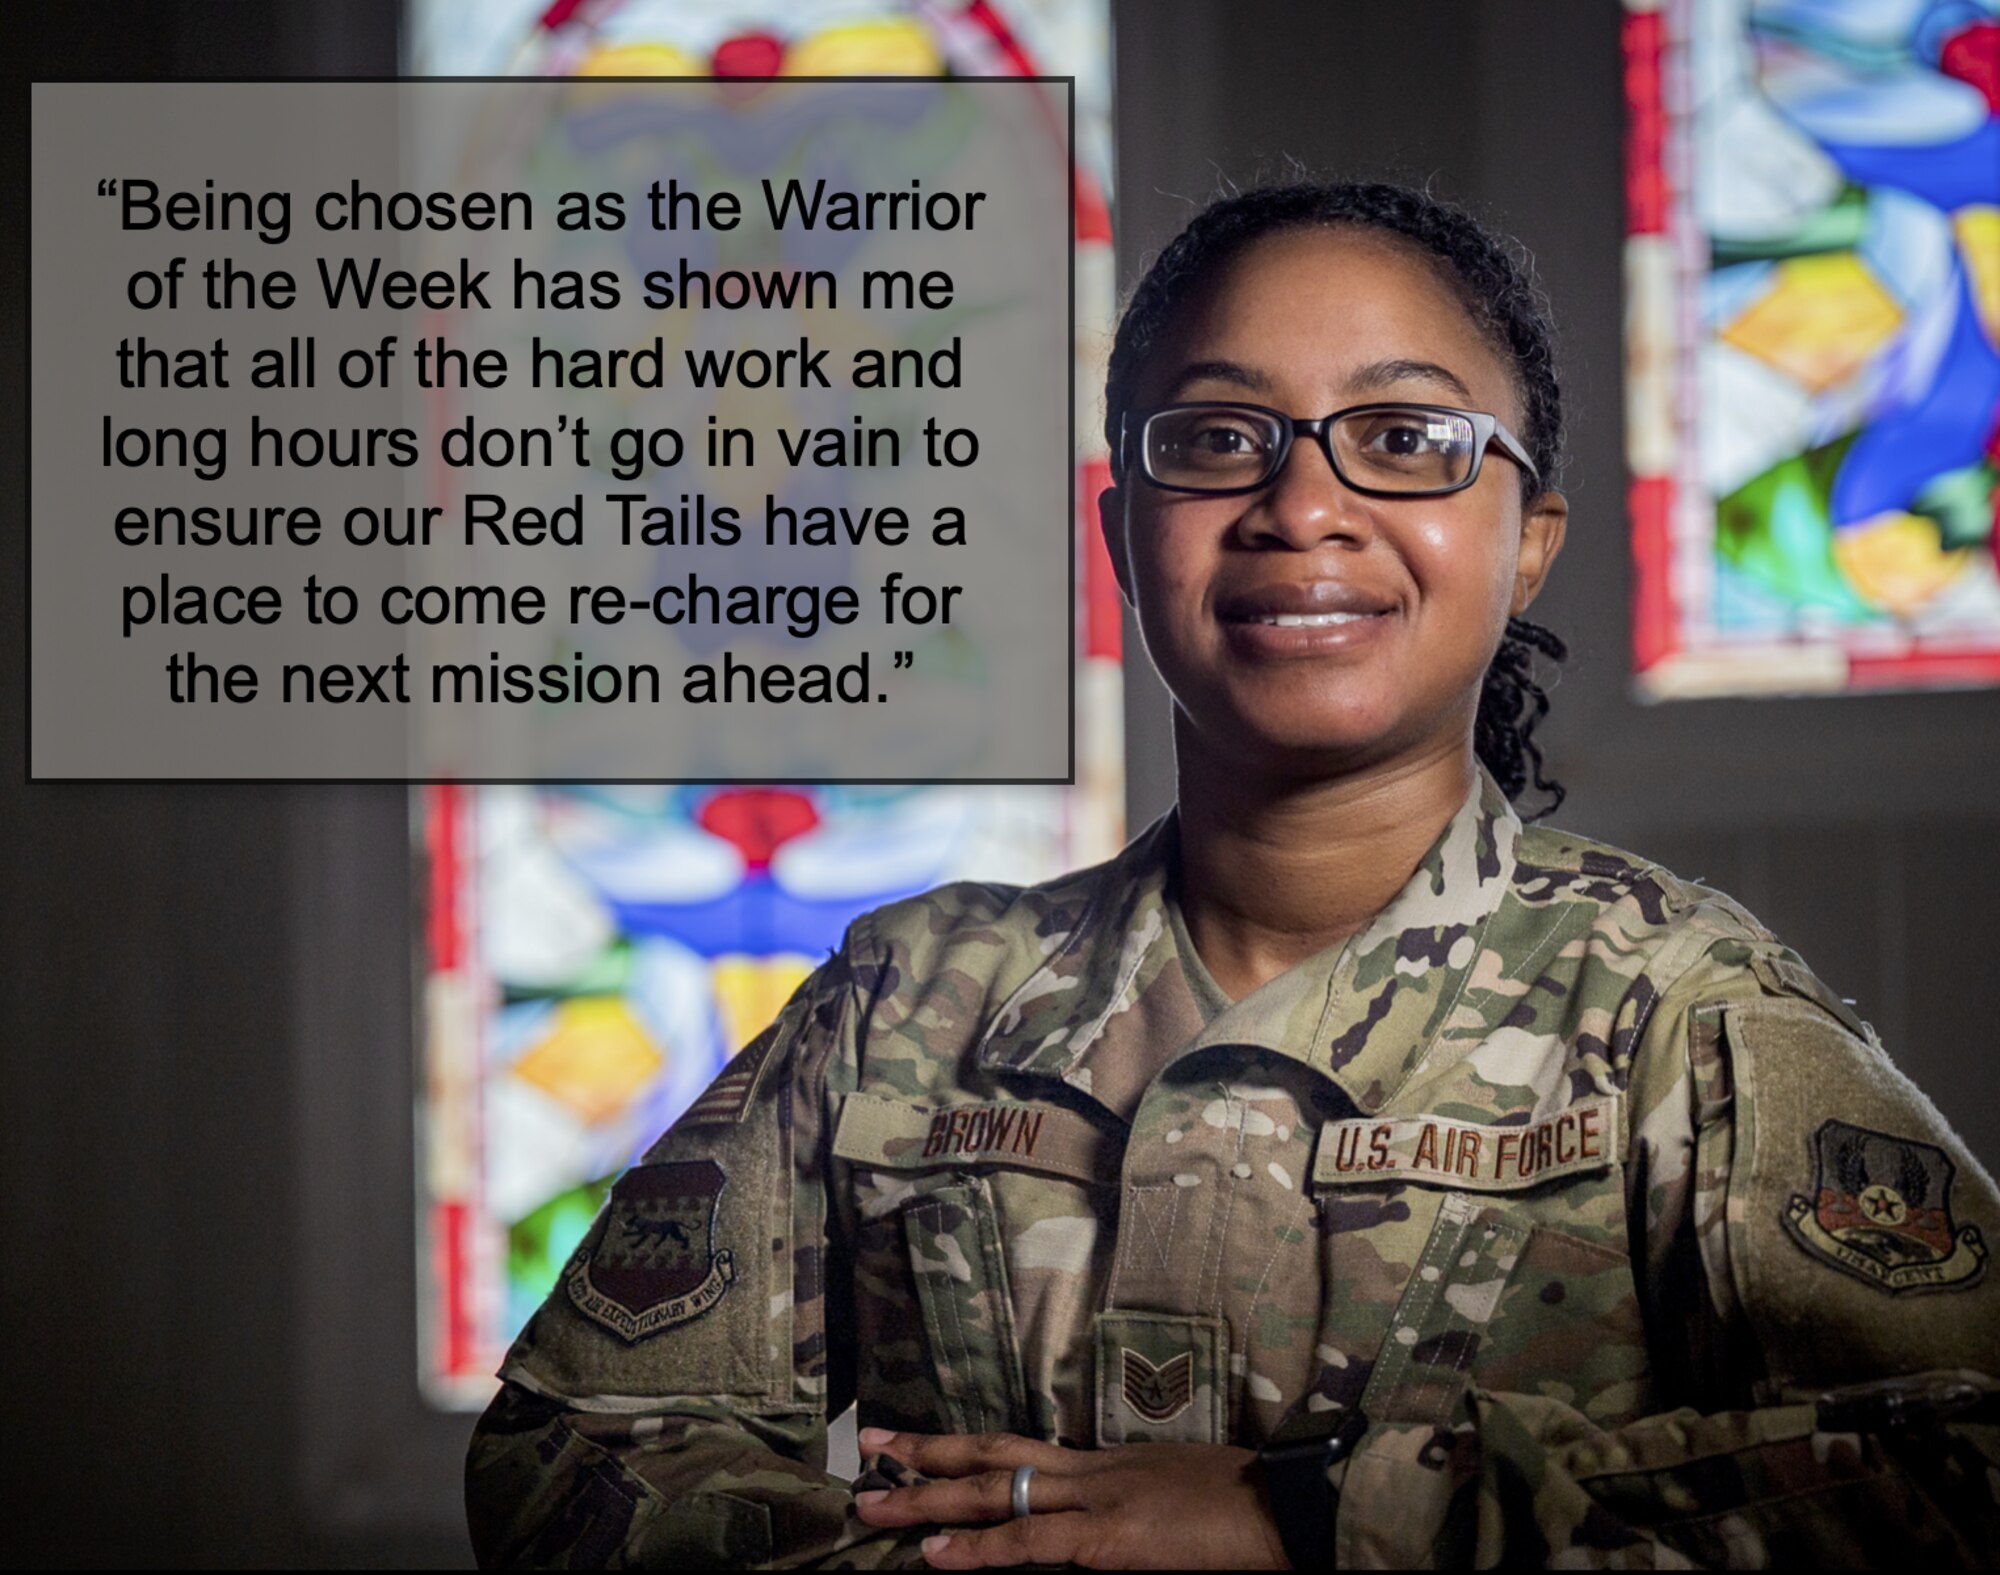 Warrior of the Week, 332d Air Expeditionary Chapel
332d Air Expeditionary Wing Warrior of the Week for the week of Feb. 20, 2022 is Tech. Sgt. Brandy M. Brown, 332d Air Expeditionary Wing Religious Affairs Airman. (Photo illustration by Master Sgt. Christopher Parr)